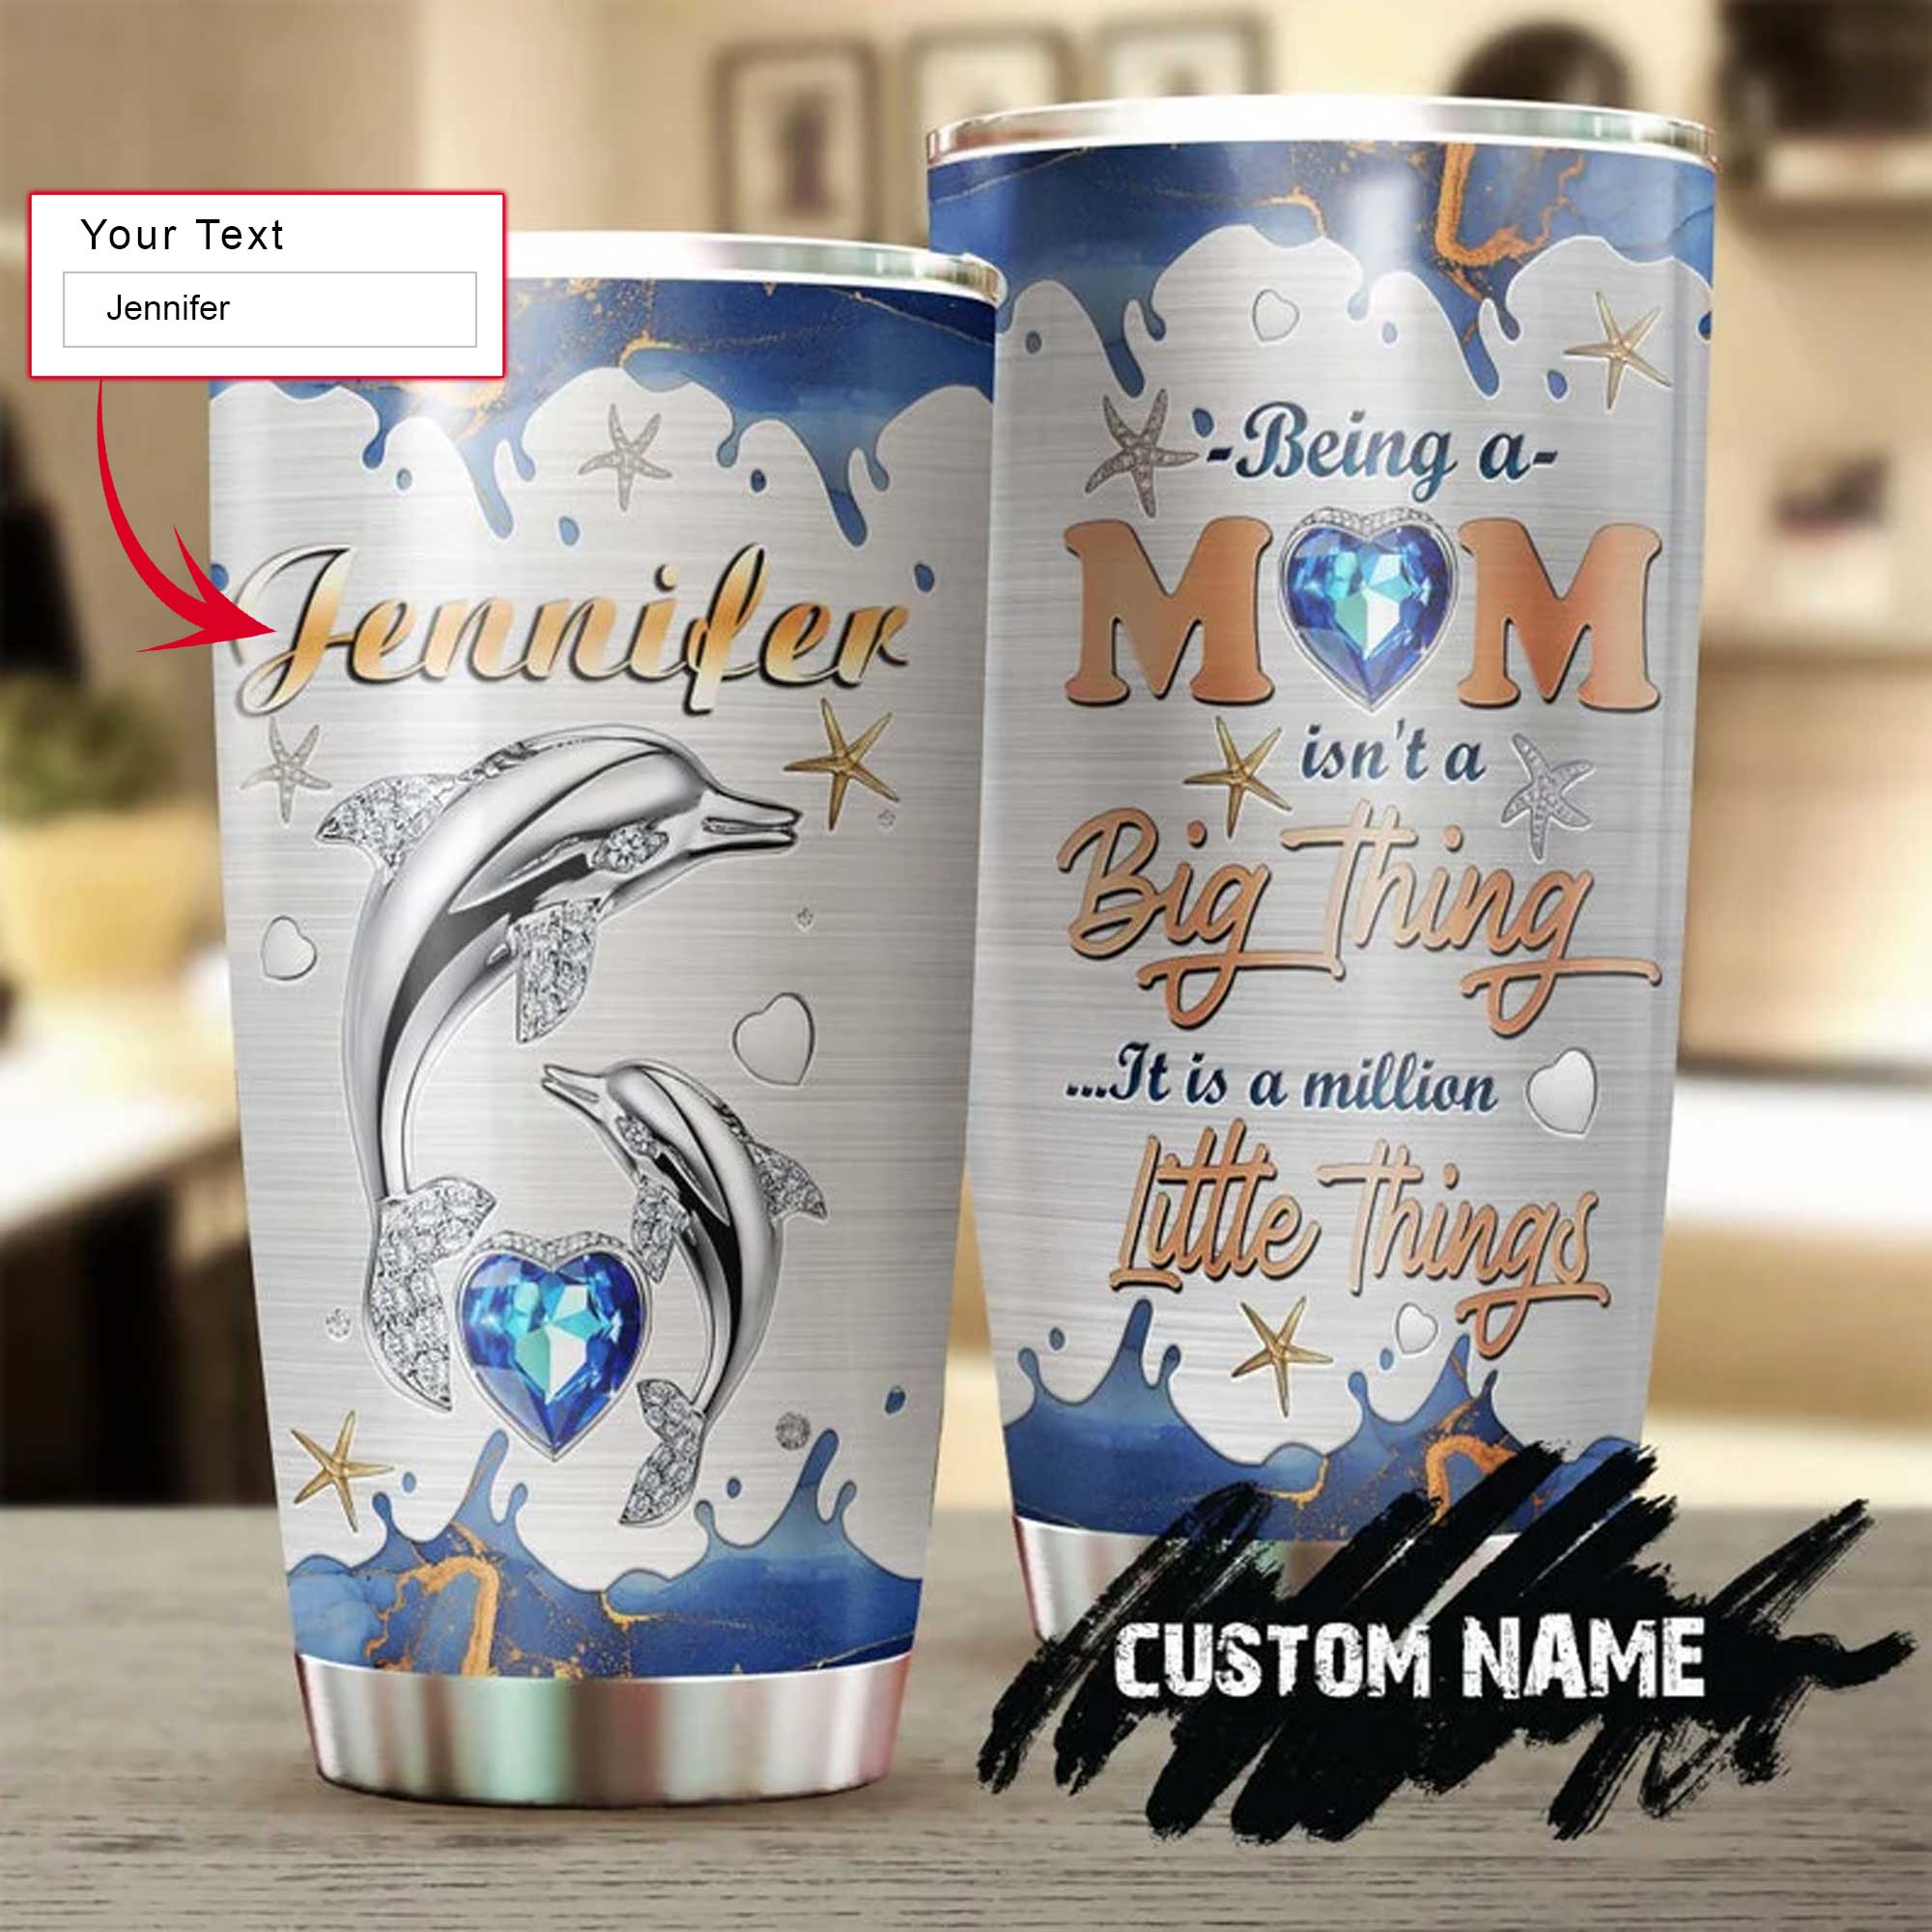 Personalized Mother's Day Gift Tumbler - Custom Gift For Mother's Day, Presents for Mom - Dolphin Mom, Being A Mom Is A Million Little Thing Tumbler